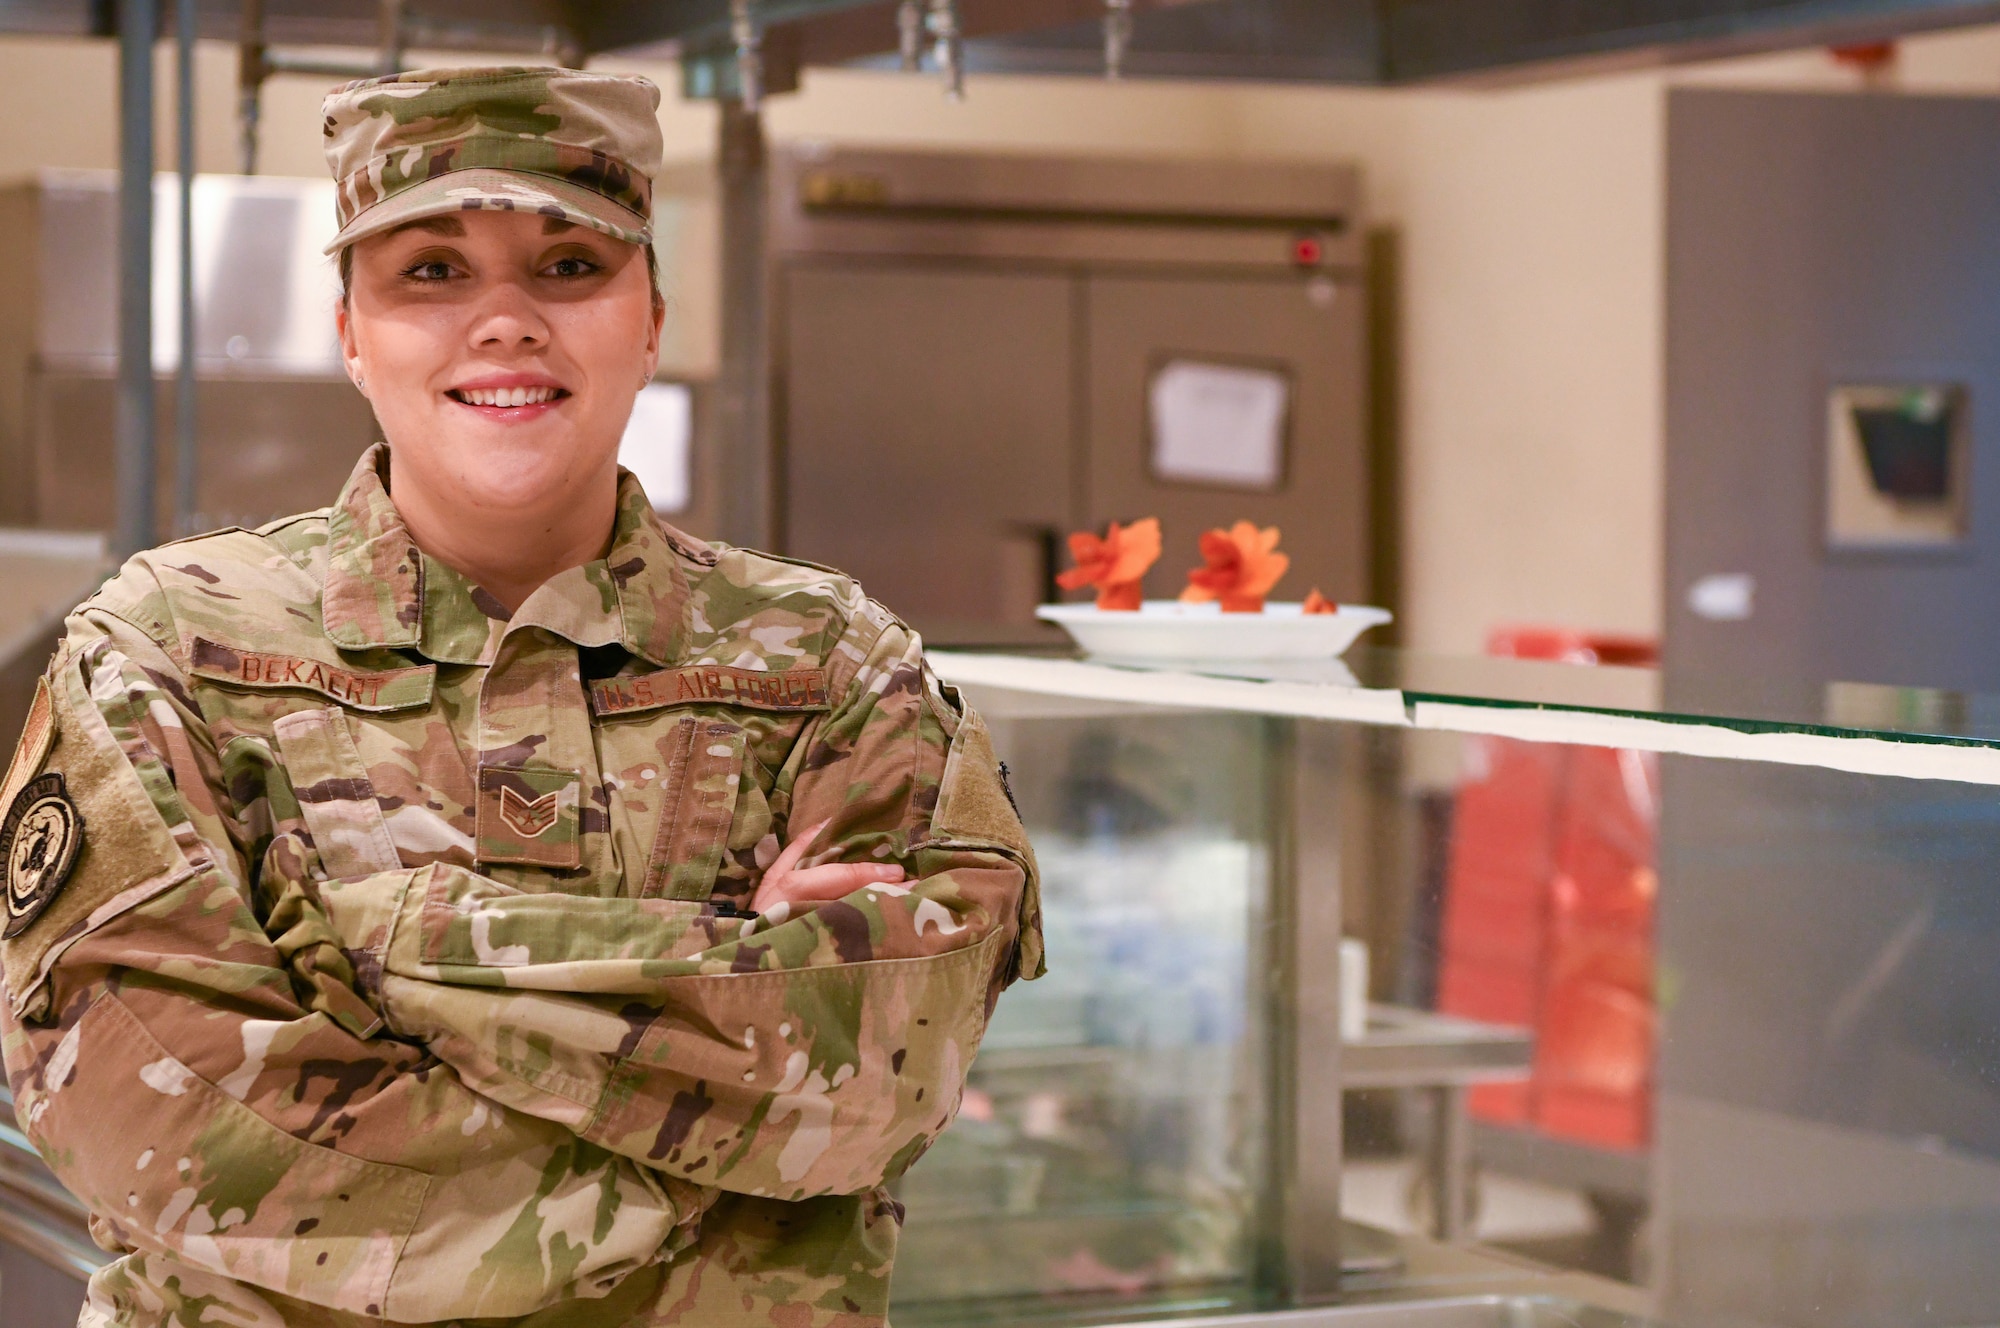 Staff Sgt. Allison Bekaert, 380th Expeditionary Force Support Squadron food production manager at Windy’s Dining Facility, along with other food service Airmen and contractors provide Agile Combat Support by serving more than 6,000 meals daily to warfighters across Al Dhafra Air Base, United Arab Emirates, July 7, 2020. More than 100 personnel run three dining facilities on base and ensure bottled water is accessible at all times to everyone on ADAB. (U.S. Air Force Photo by Tech. Sgt. Melissa Harvey)